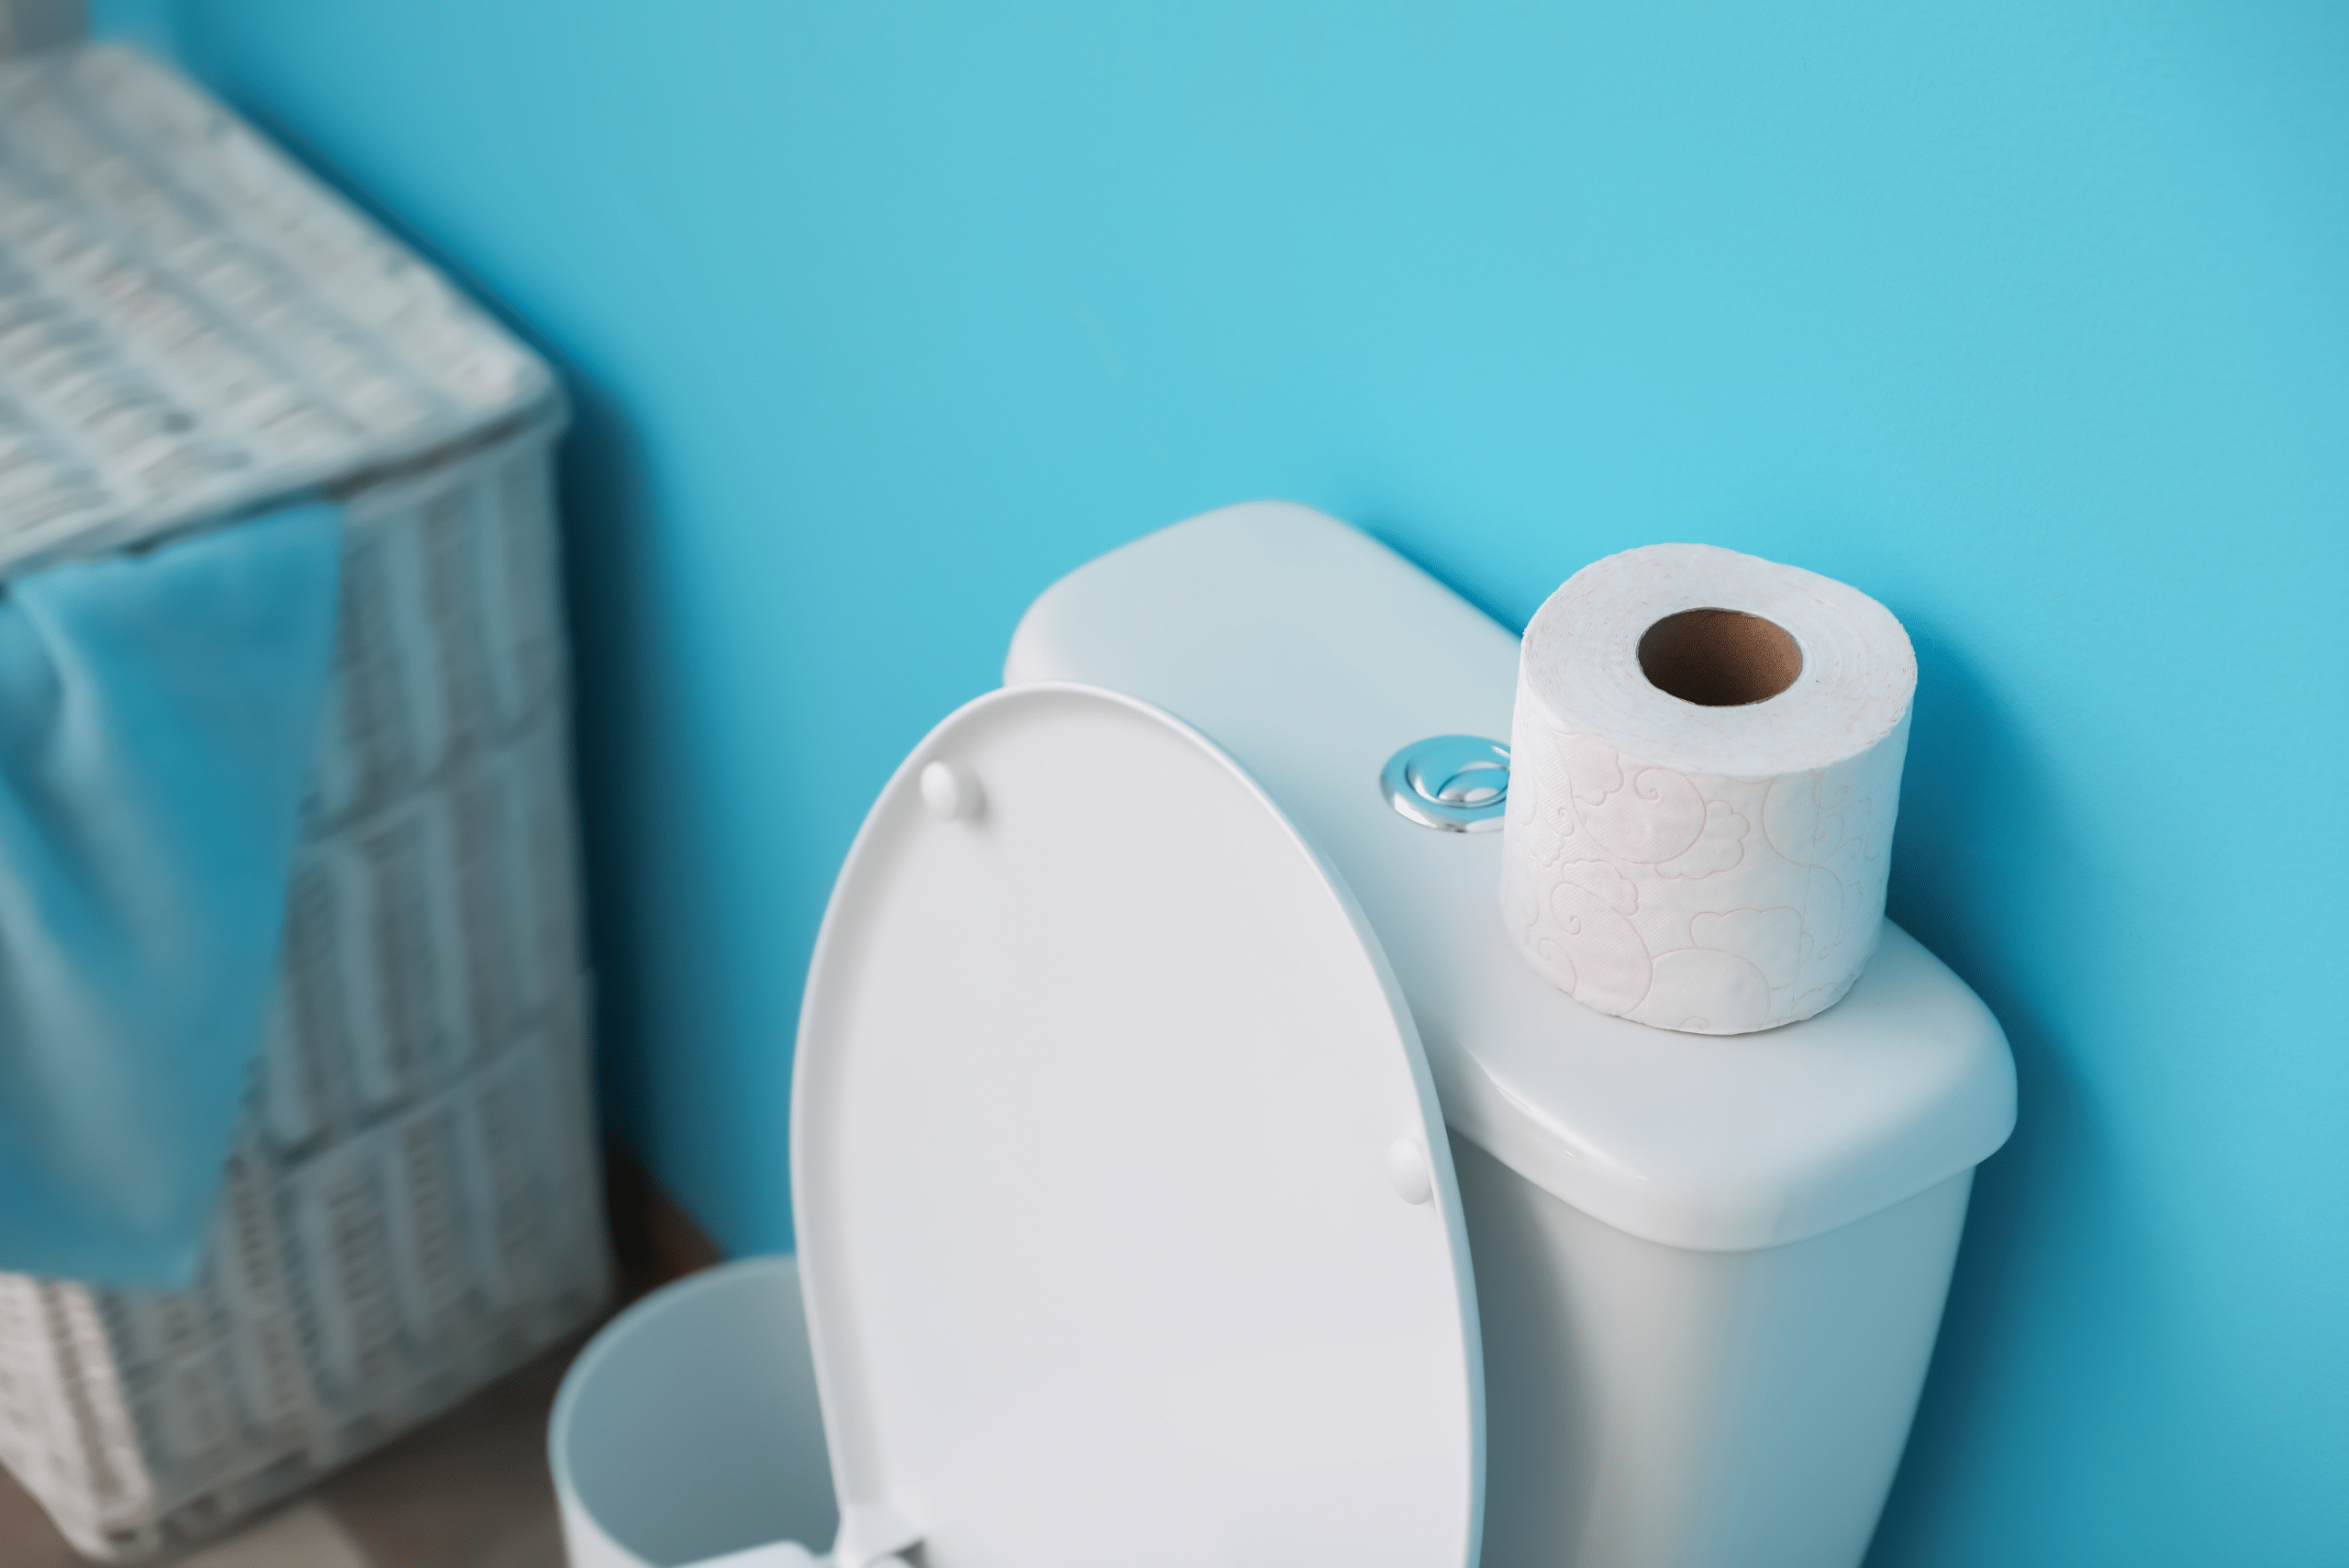 A toilet paper roll on the toilet tank in a bathroom with blue walls.